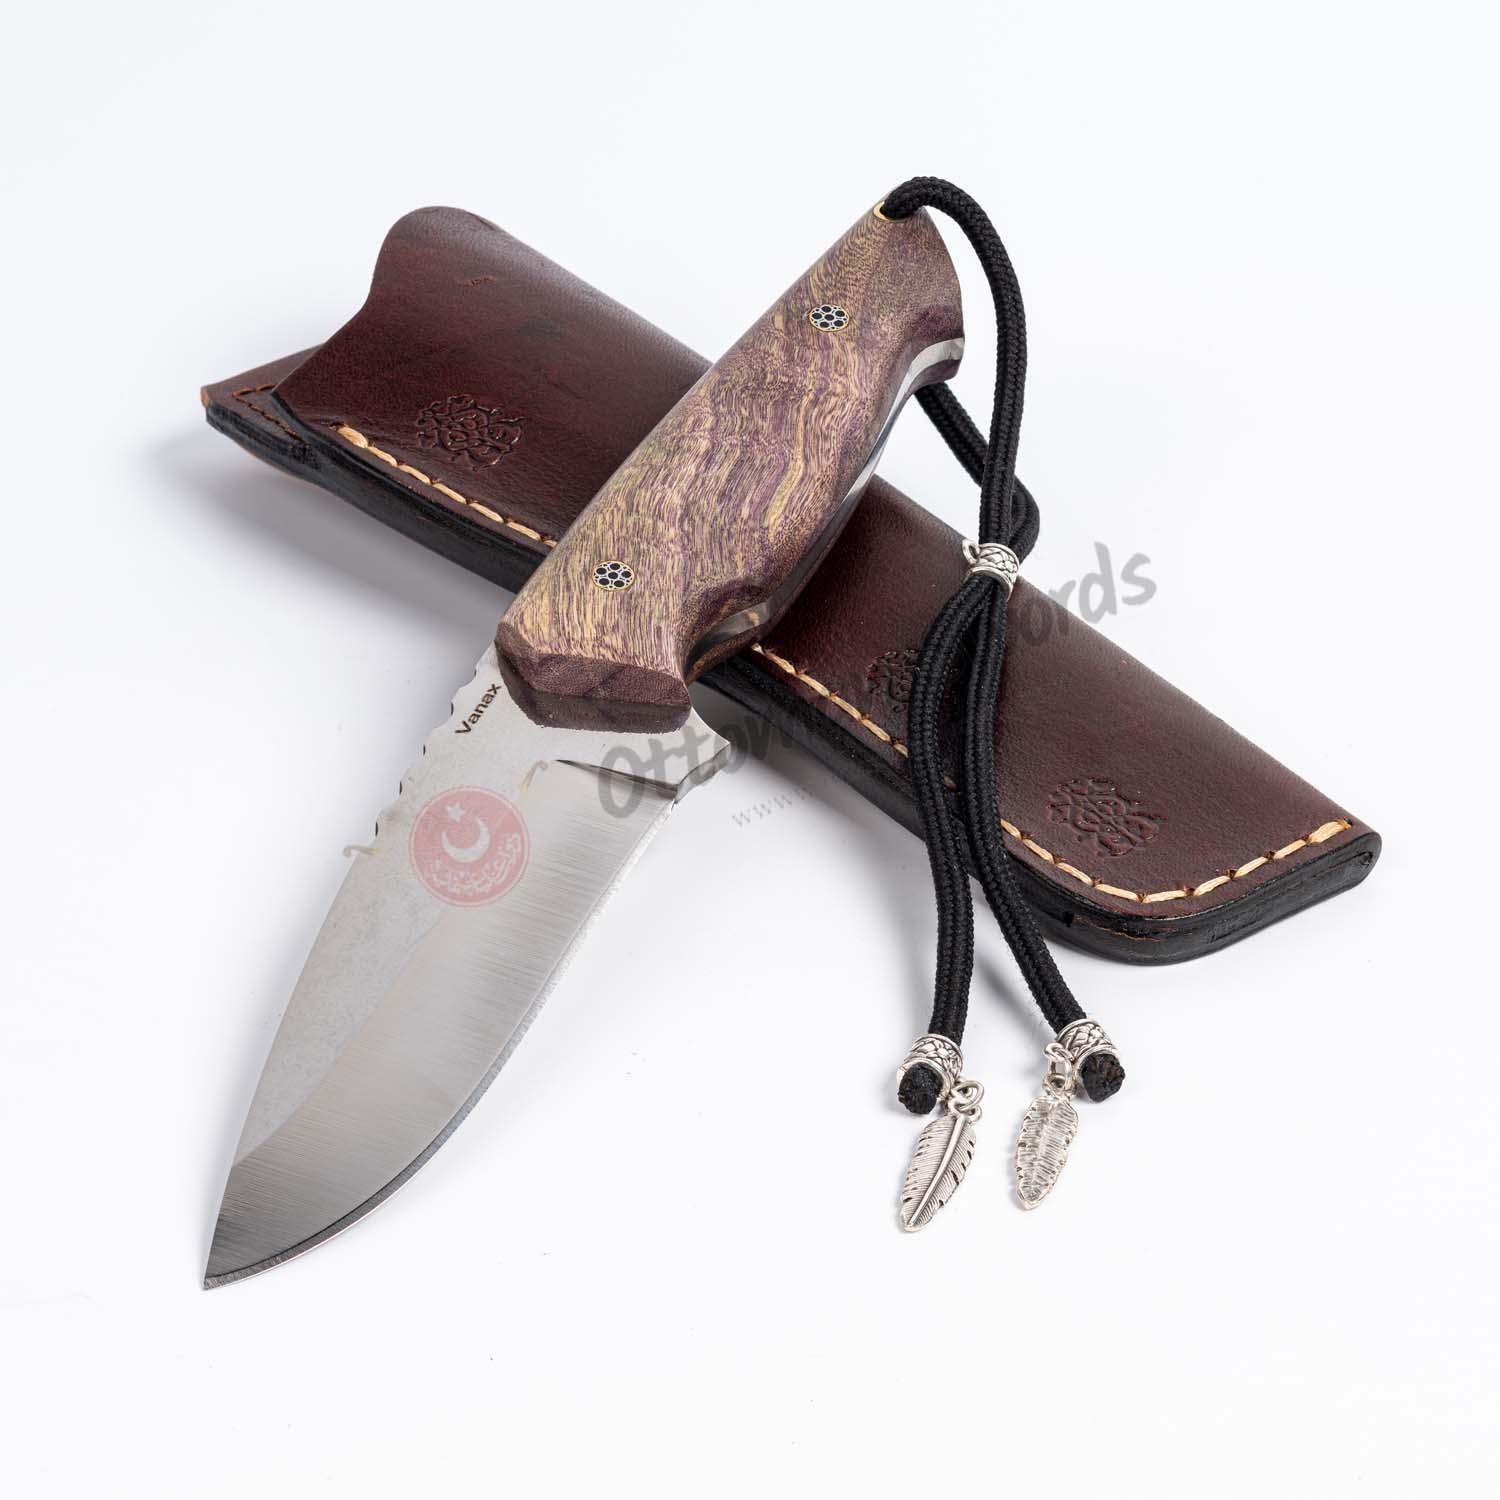 Vanax Steel Collectible Survival Knife For Sale (6)